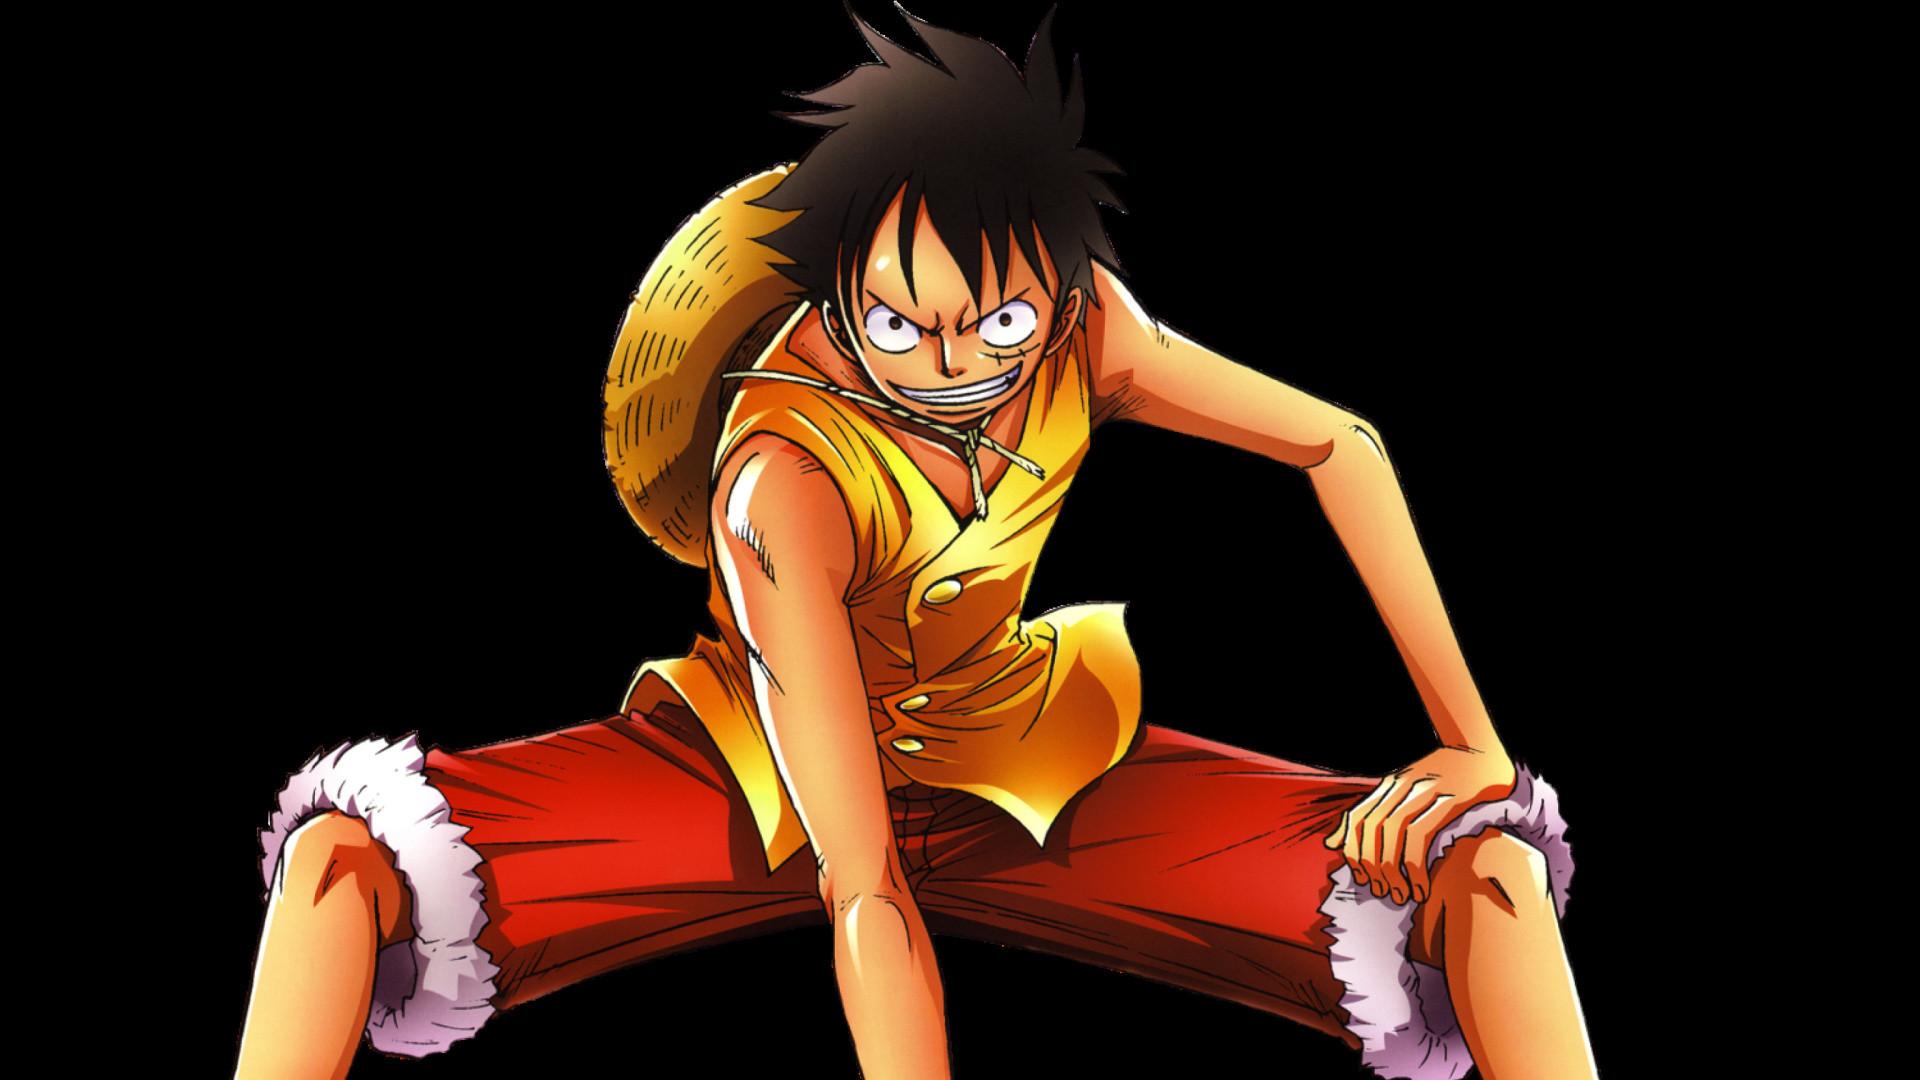 1920 x 1080 · jpeg - One Piece Wallpaper Luffy (64+ images)